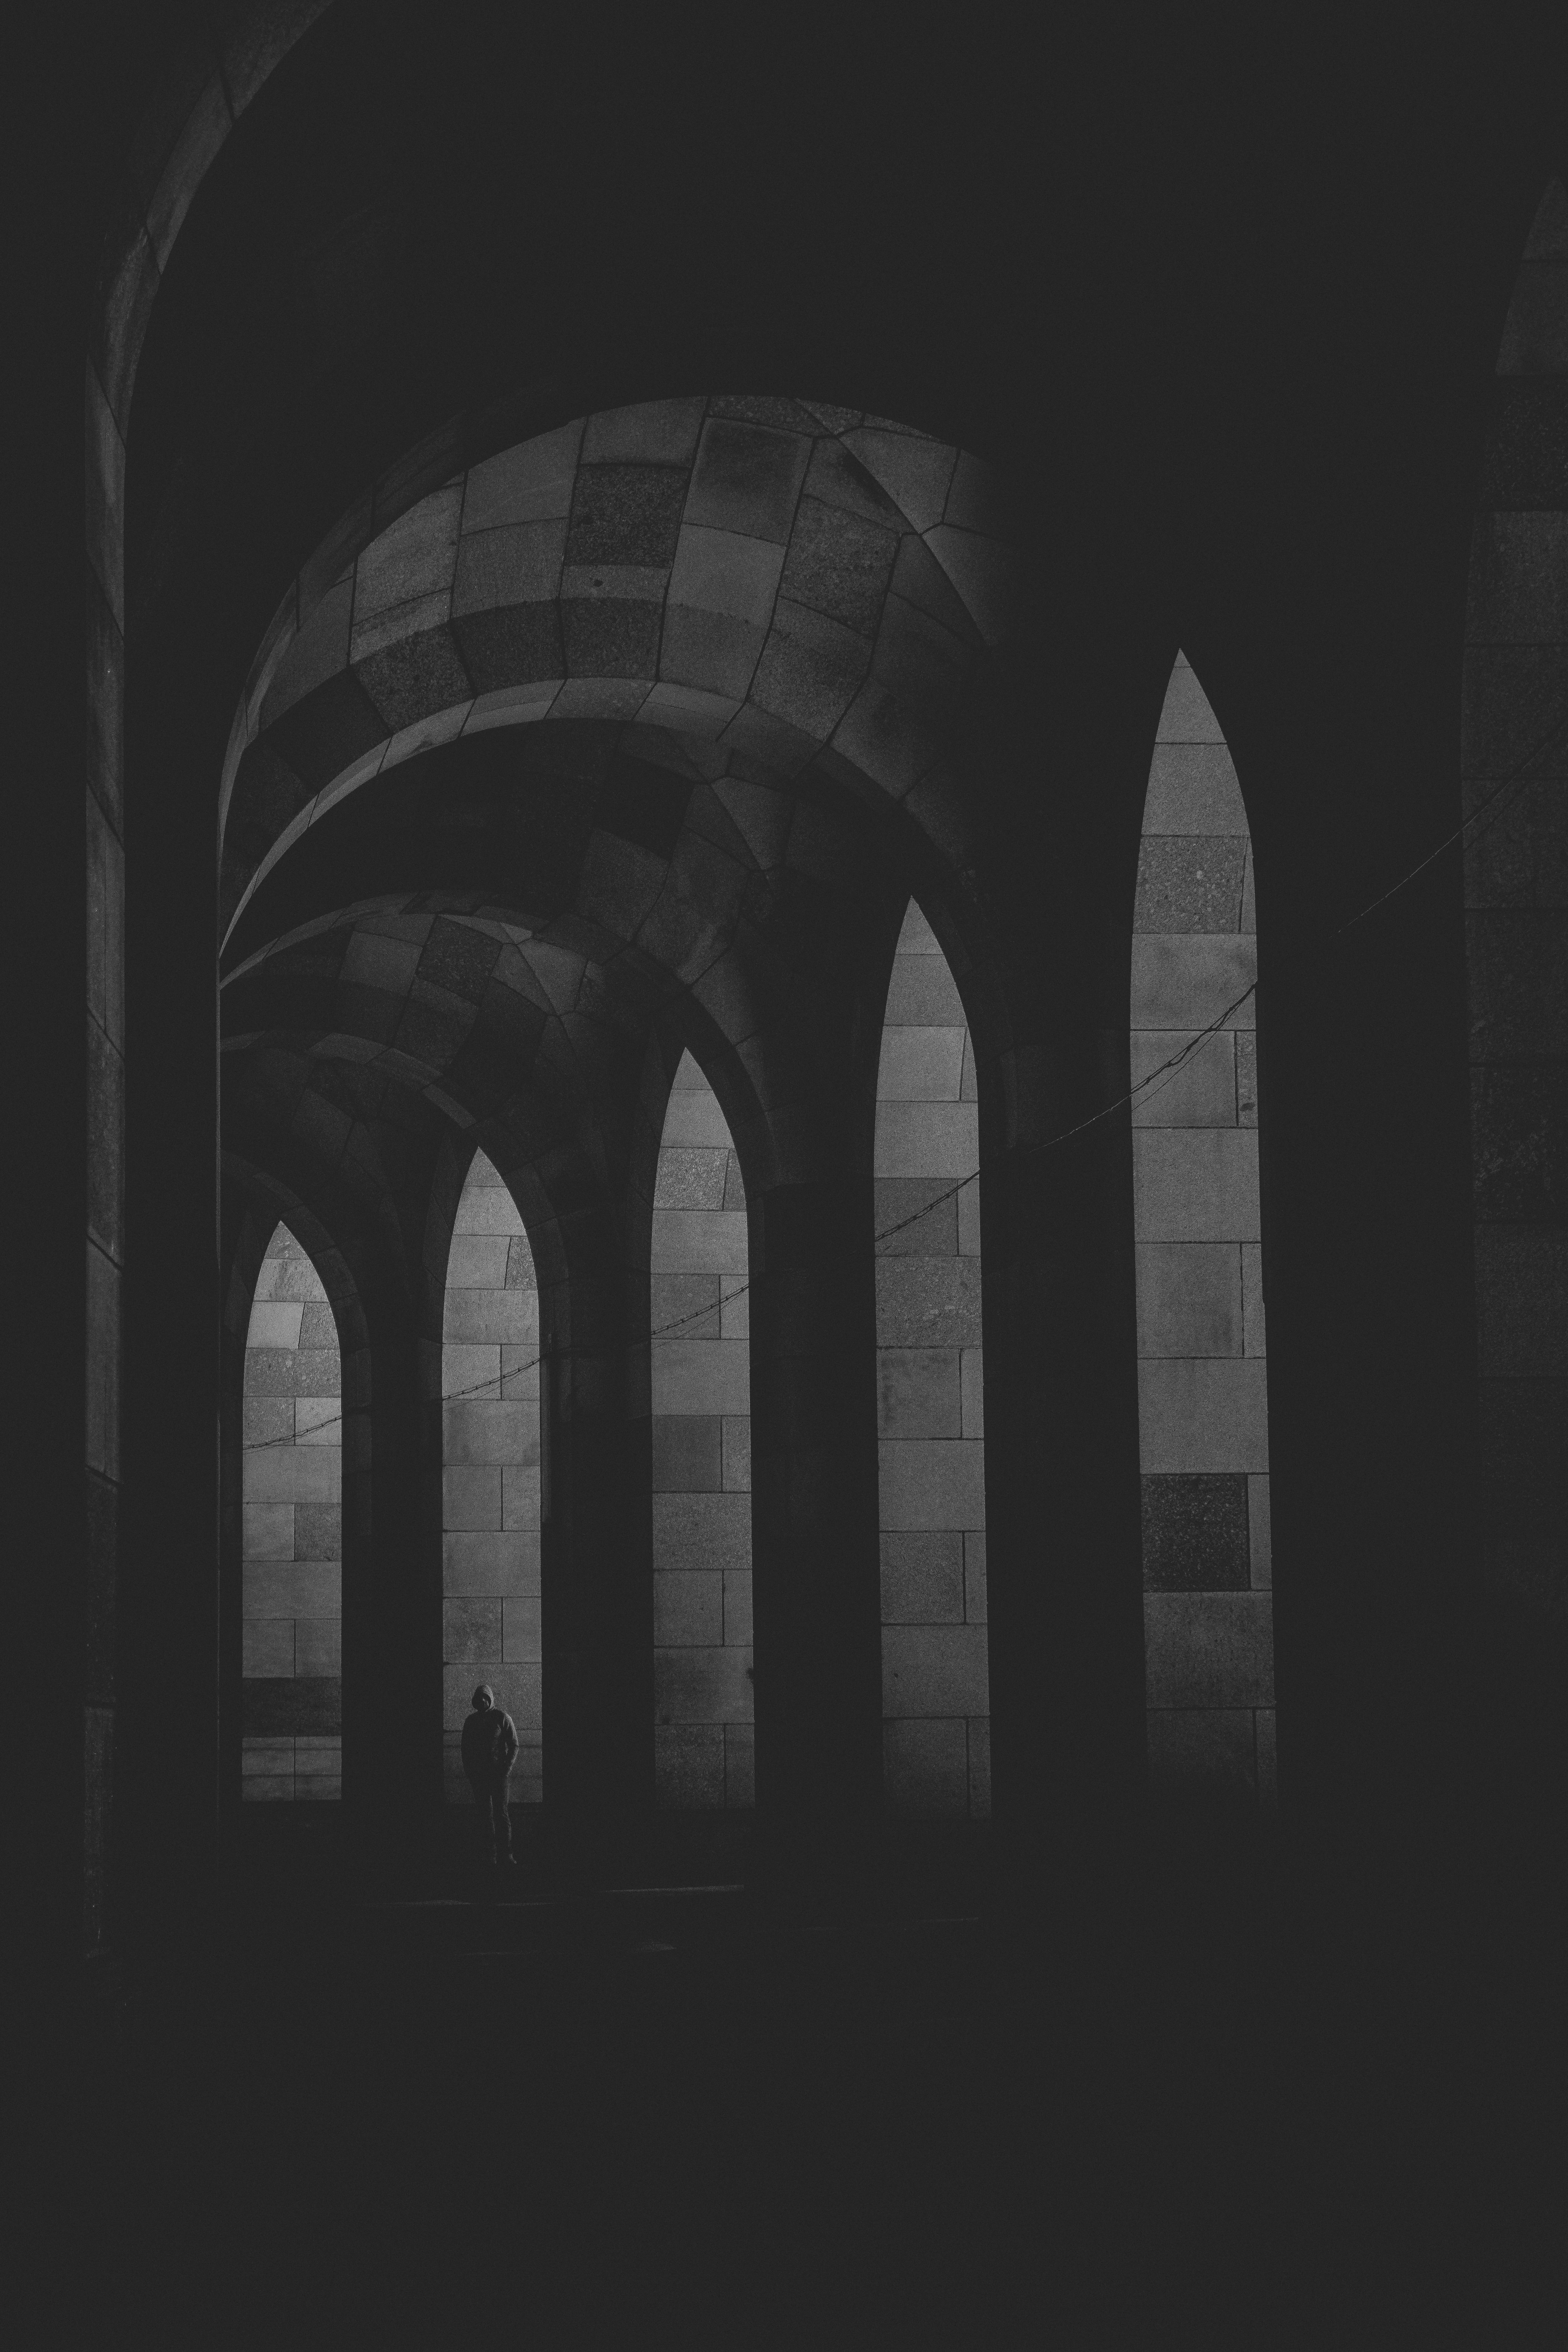 alone, black, bw, chb, loneliness, arch, lonely, arches